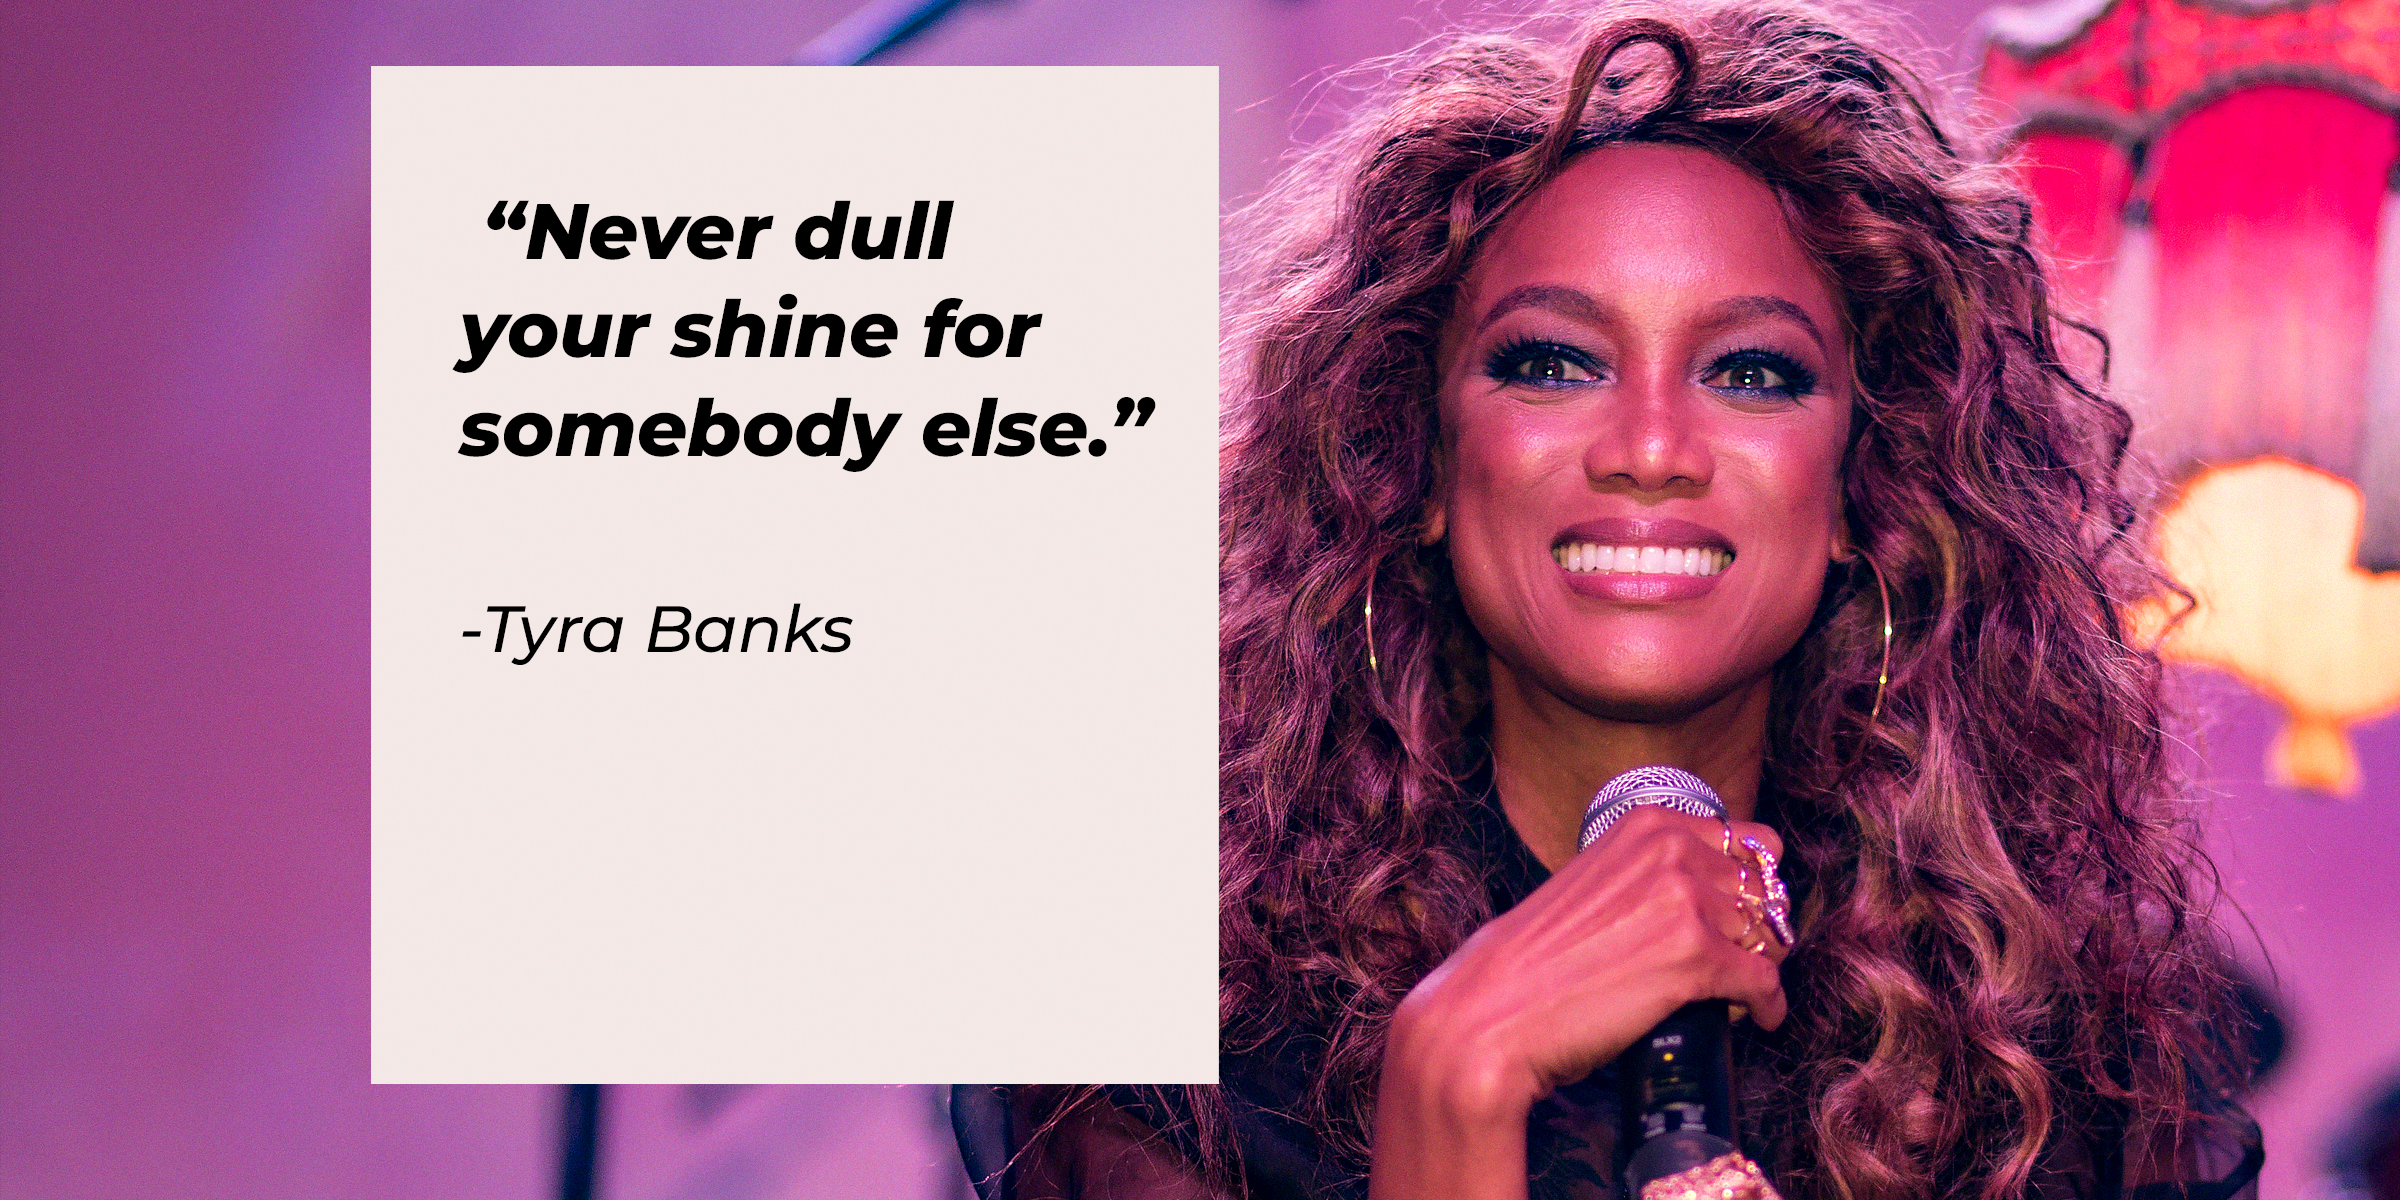 Tyra Banks, with her quote: "Never dull your shine for somebody else." | Source: Getty Images